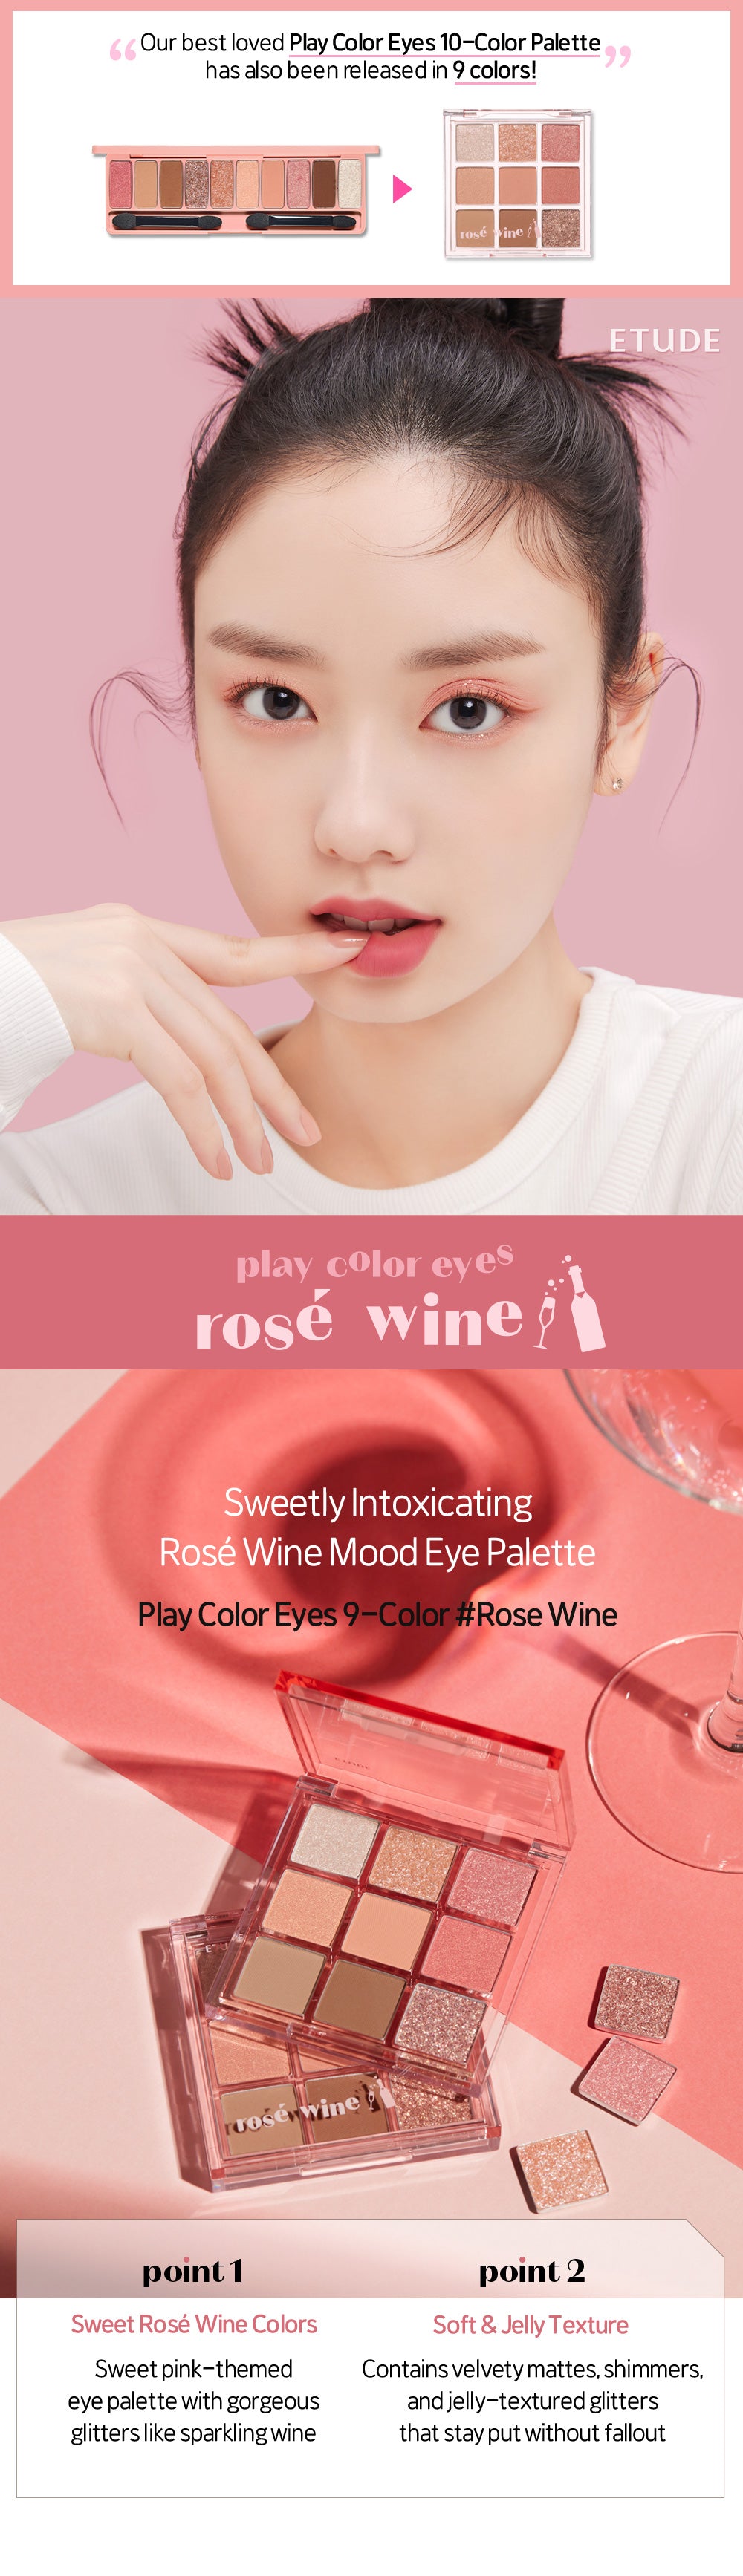 Play Color Eyes 9-Color #rosewine